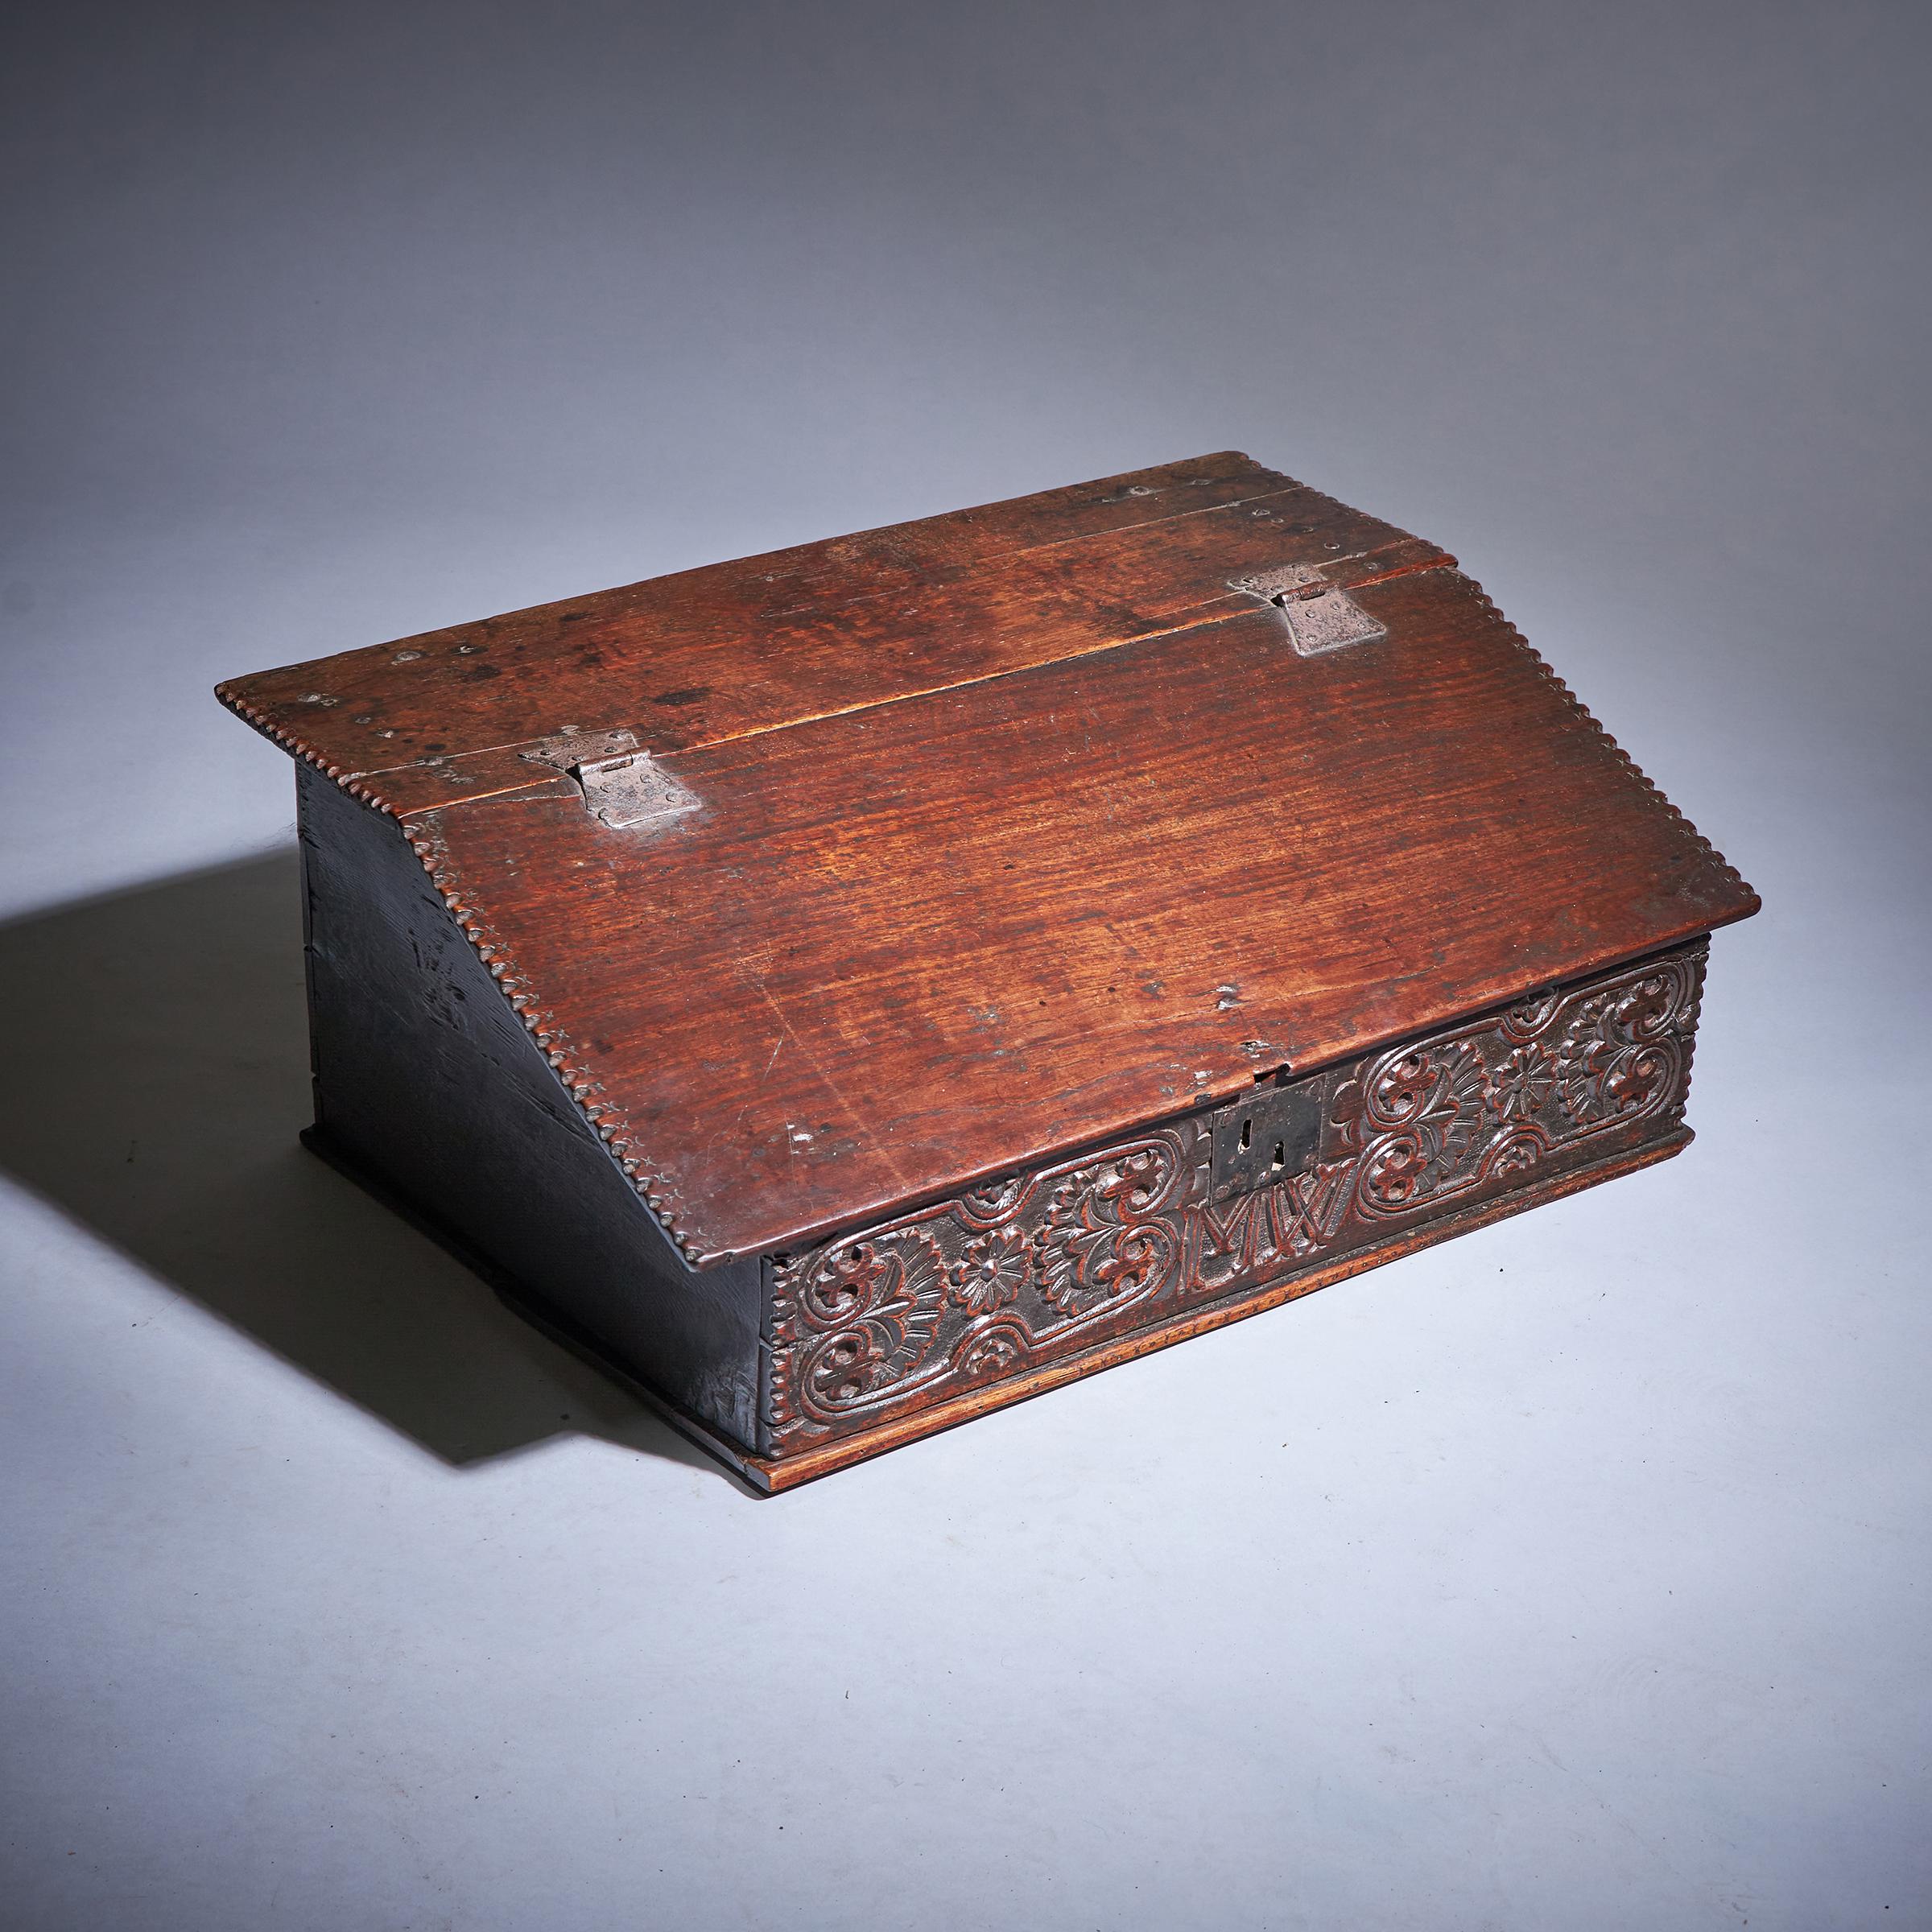 A Rare 17th-Century Charles II Carved Oak Writing or Desk Box, Circa 1660. England.

The box opens on the original butterfly hinges to reveal a fitted interior of three oak-lined drawers. 

The deep carving to the frieze is very much in the